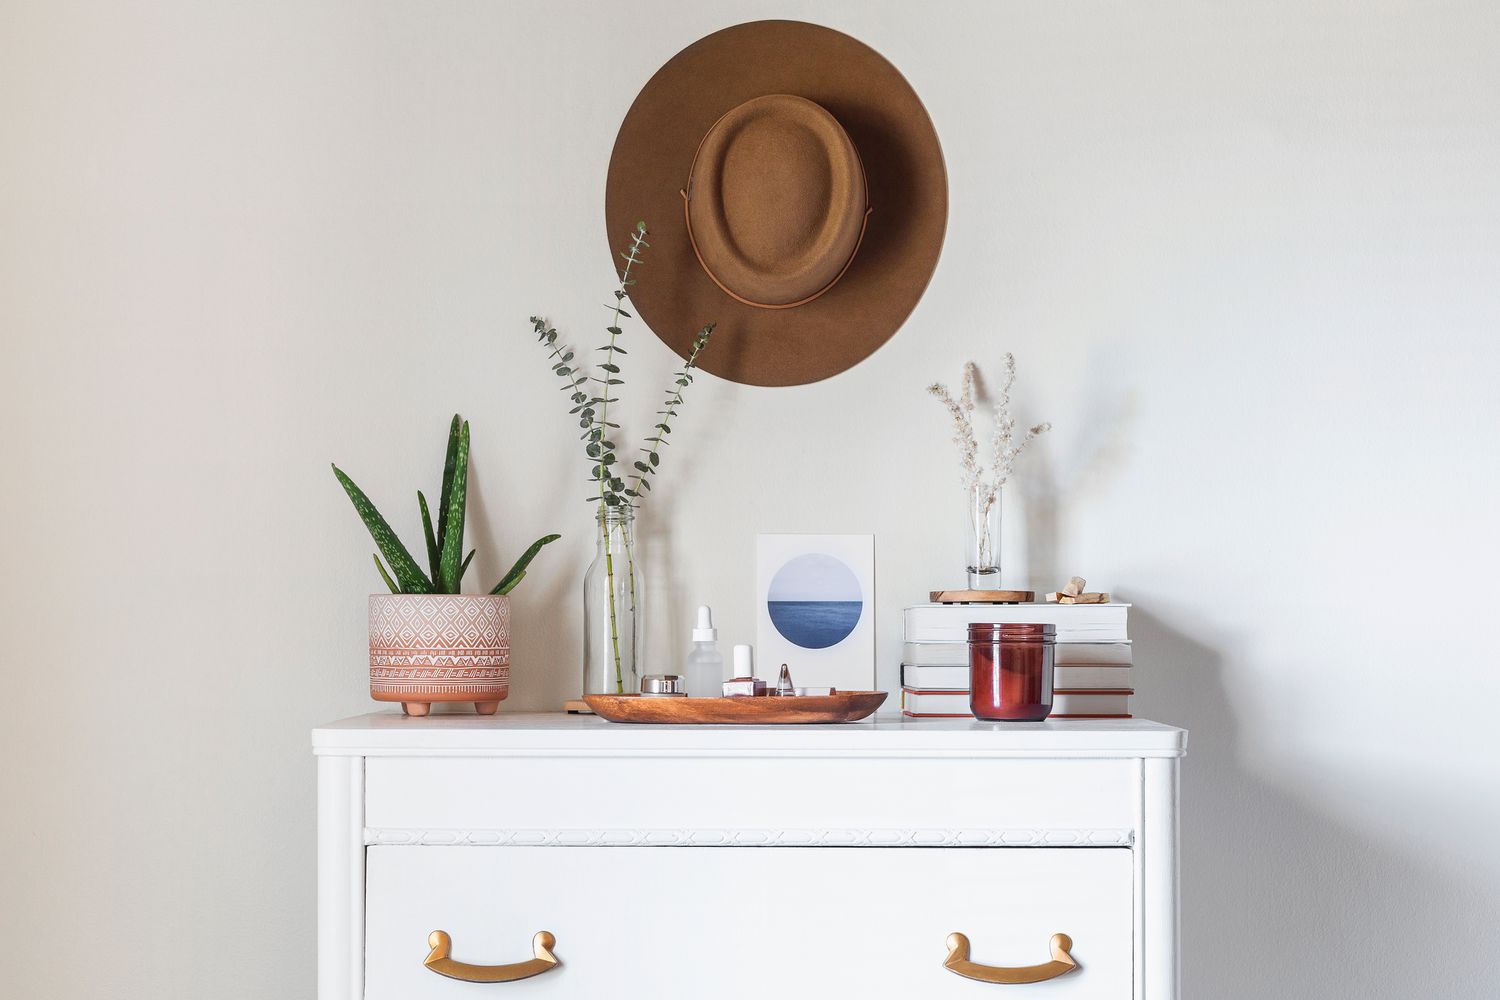 How To Decorate The Top Of A Dresser